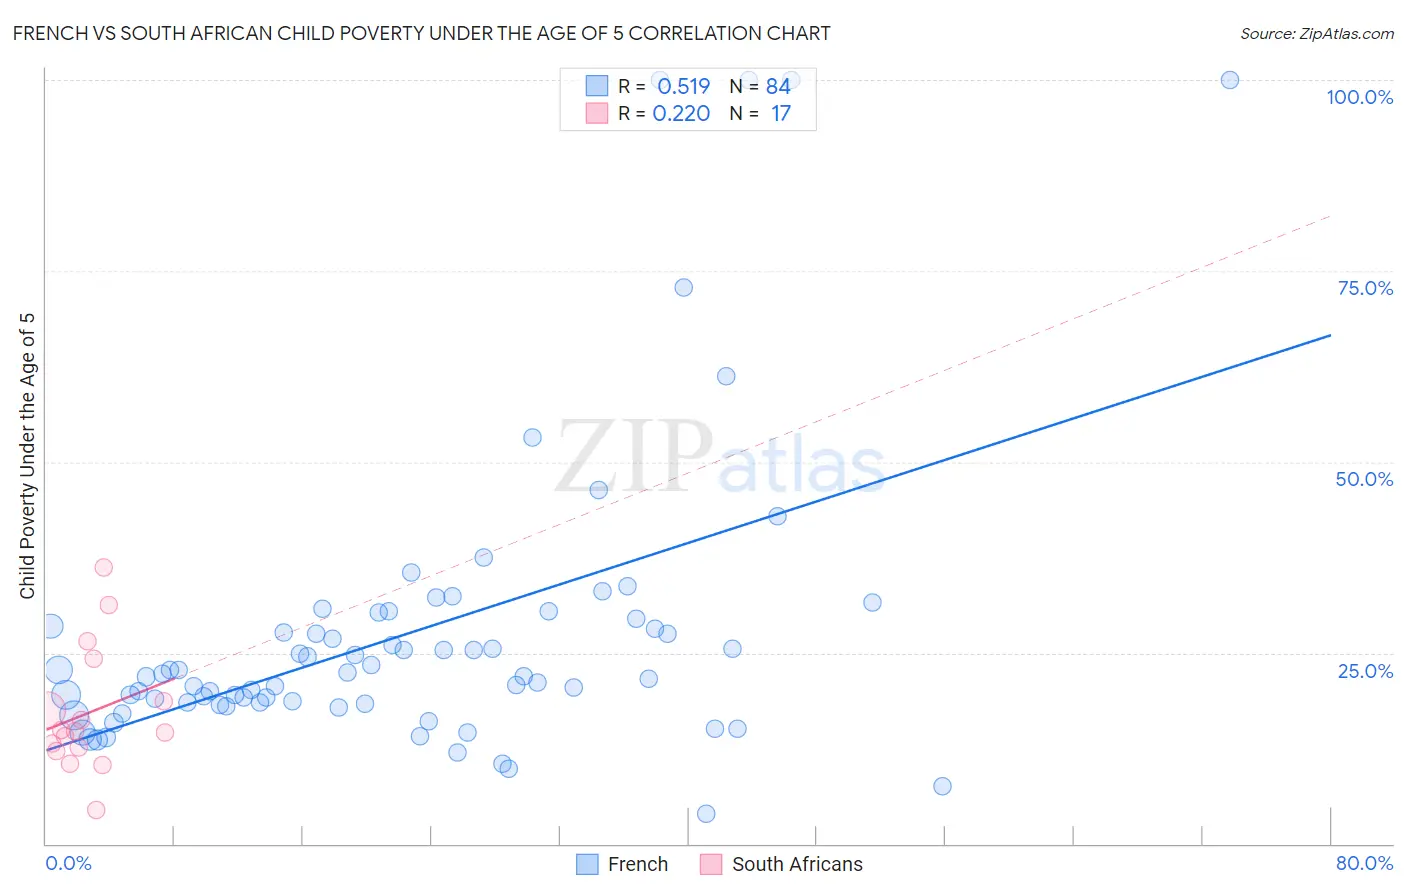 French vs South African Child Poverty Under the Age of 5